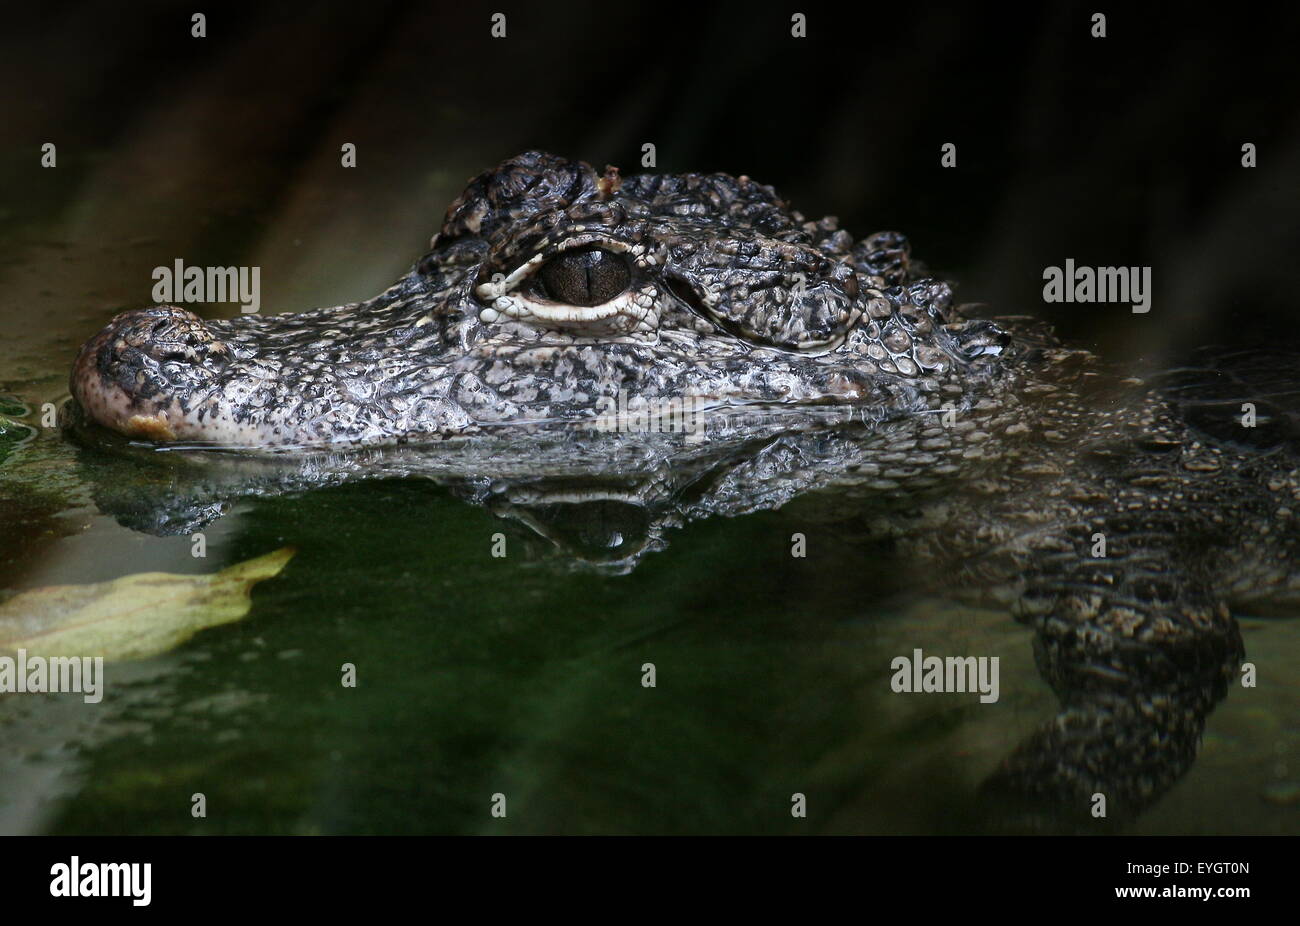 Chinese alligator (Alligator sinensis), close-up of the head, seen in profile while swimming Stock Photo